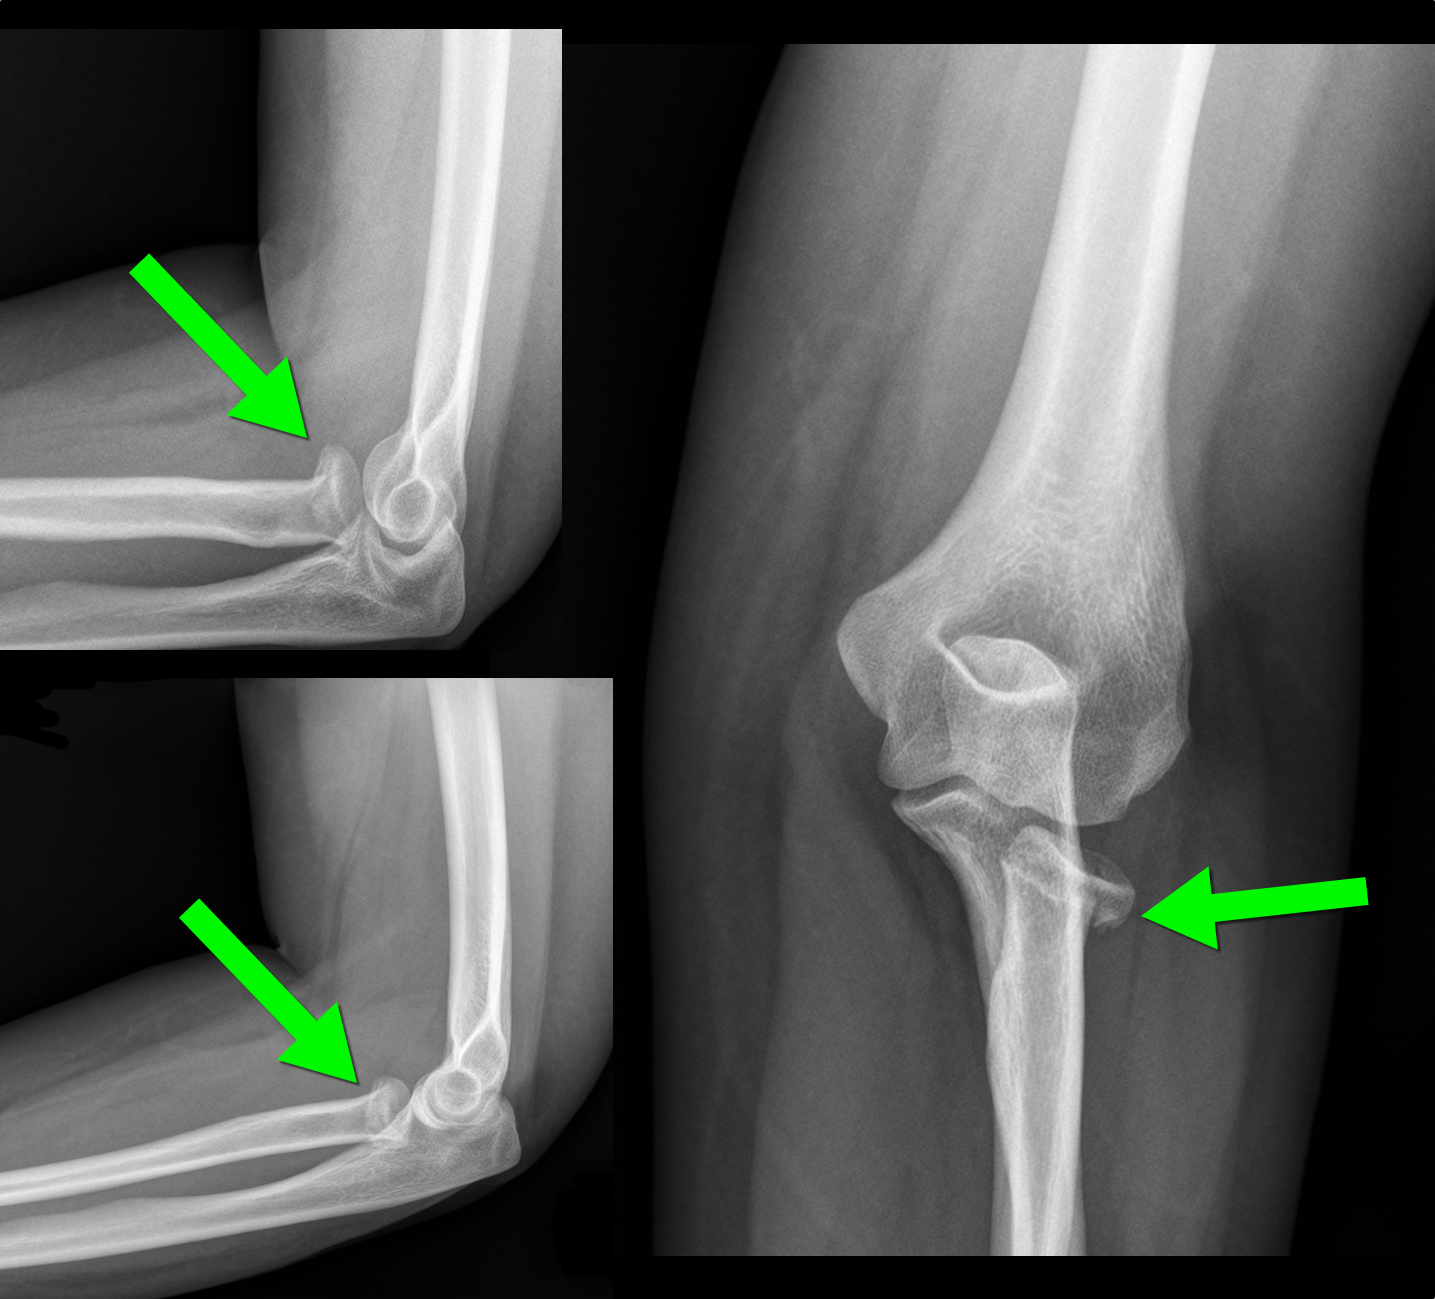 radial head fracture